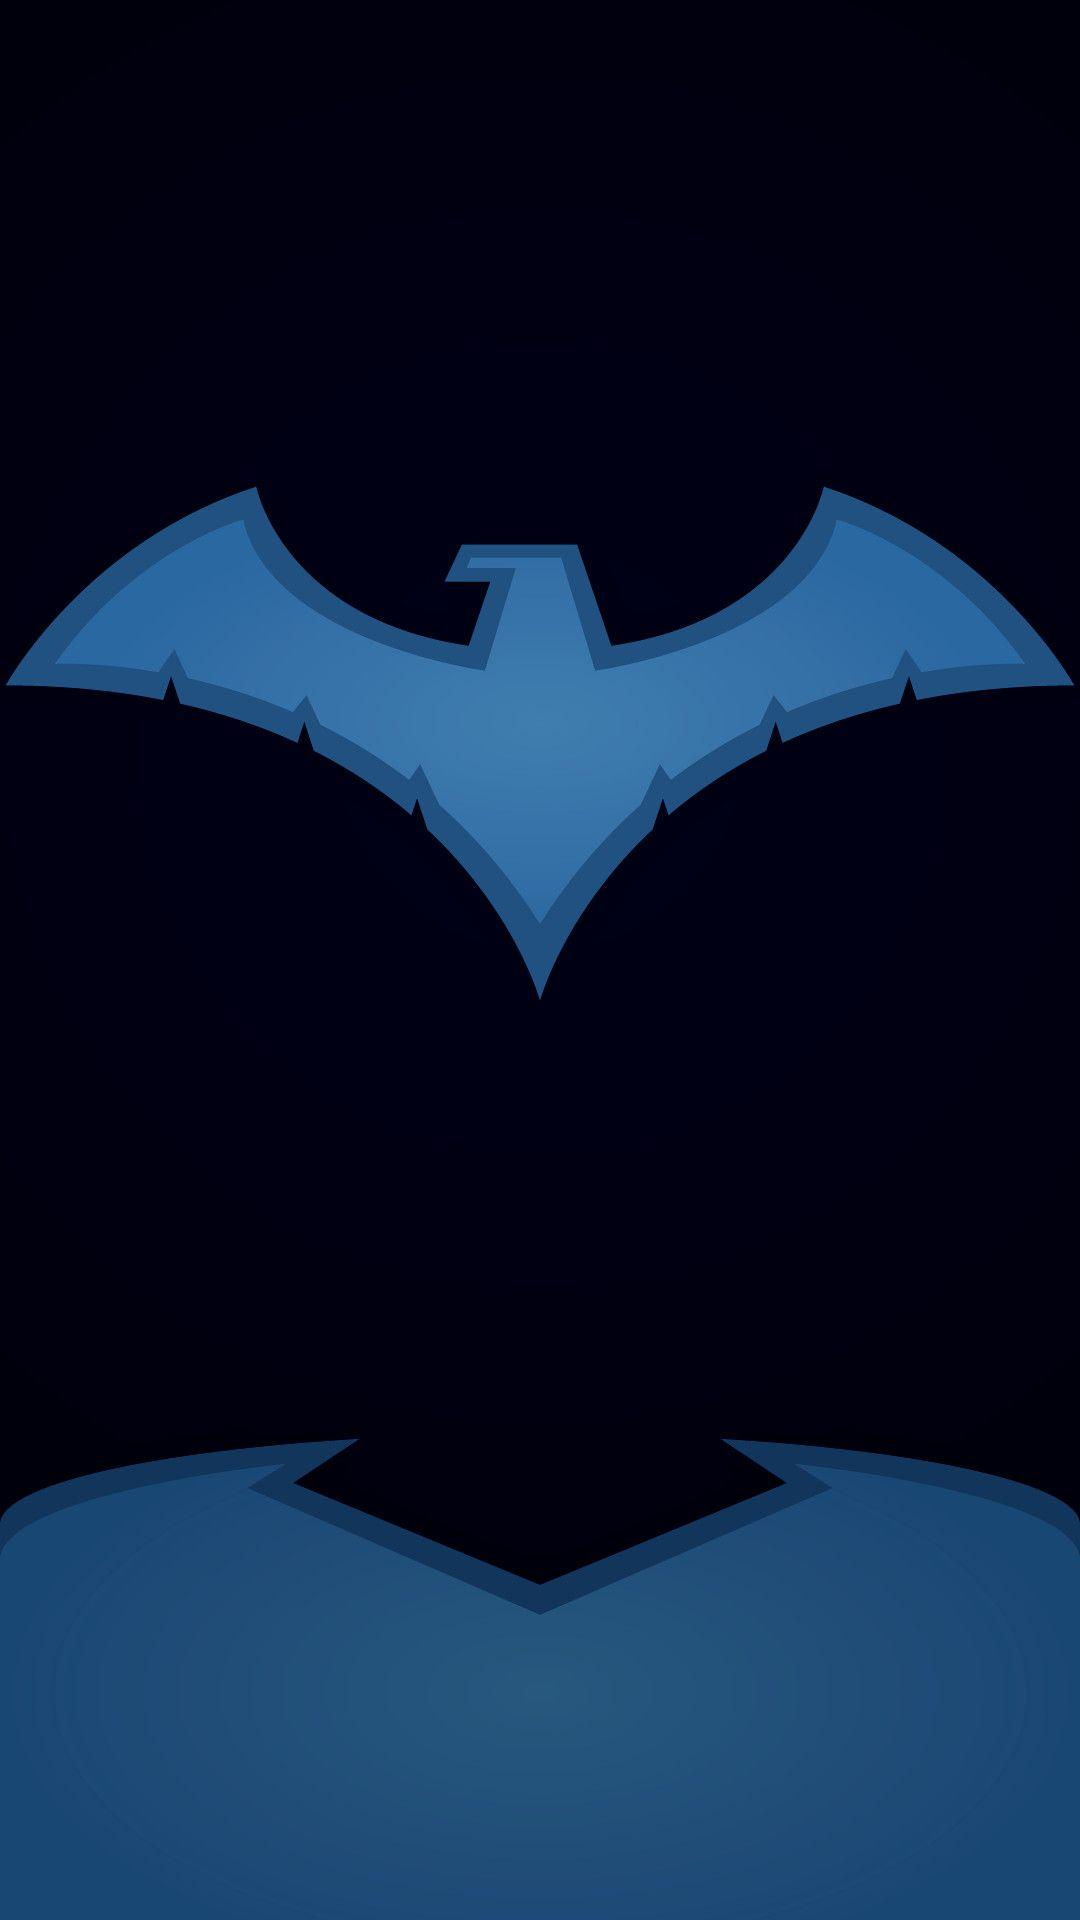 Share 66 nightwing iphone wallpaper best  incdgdbentre